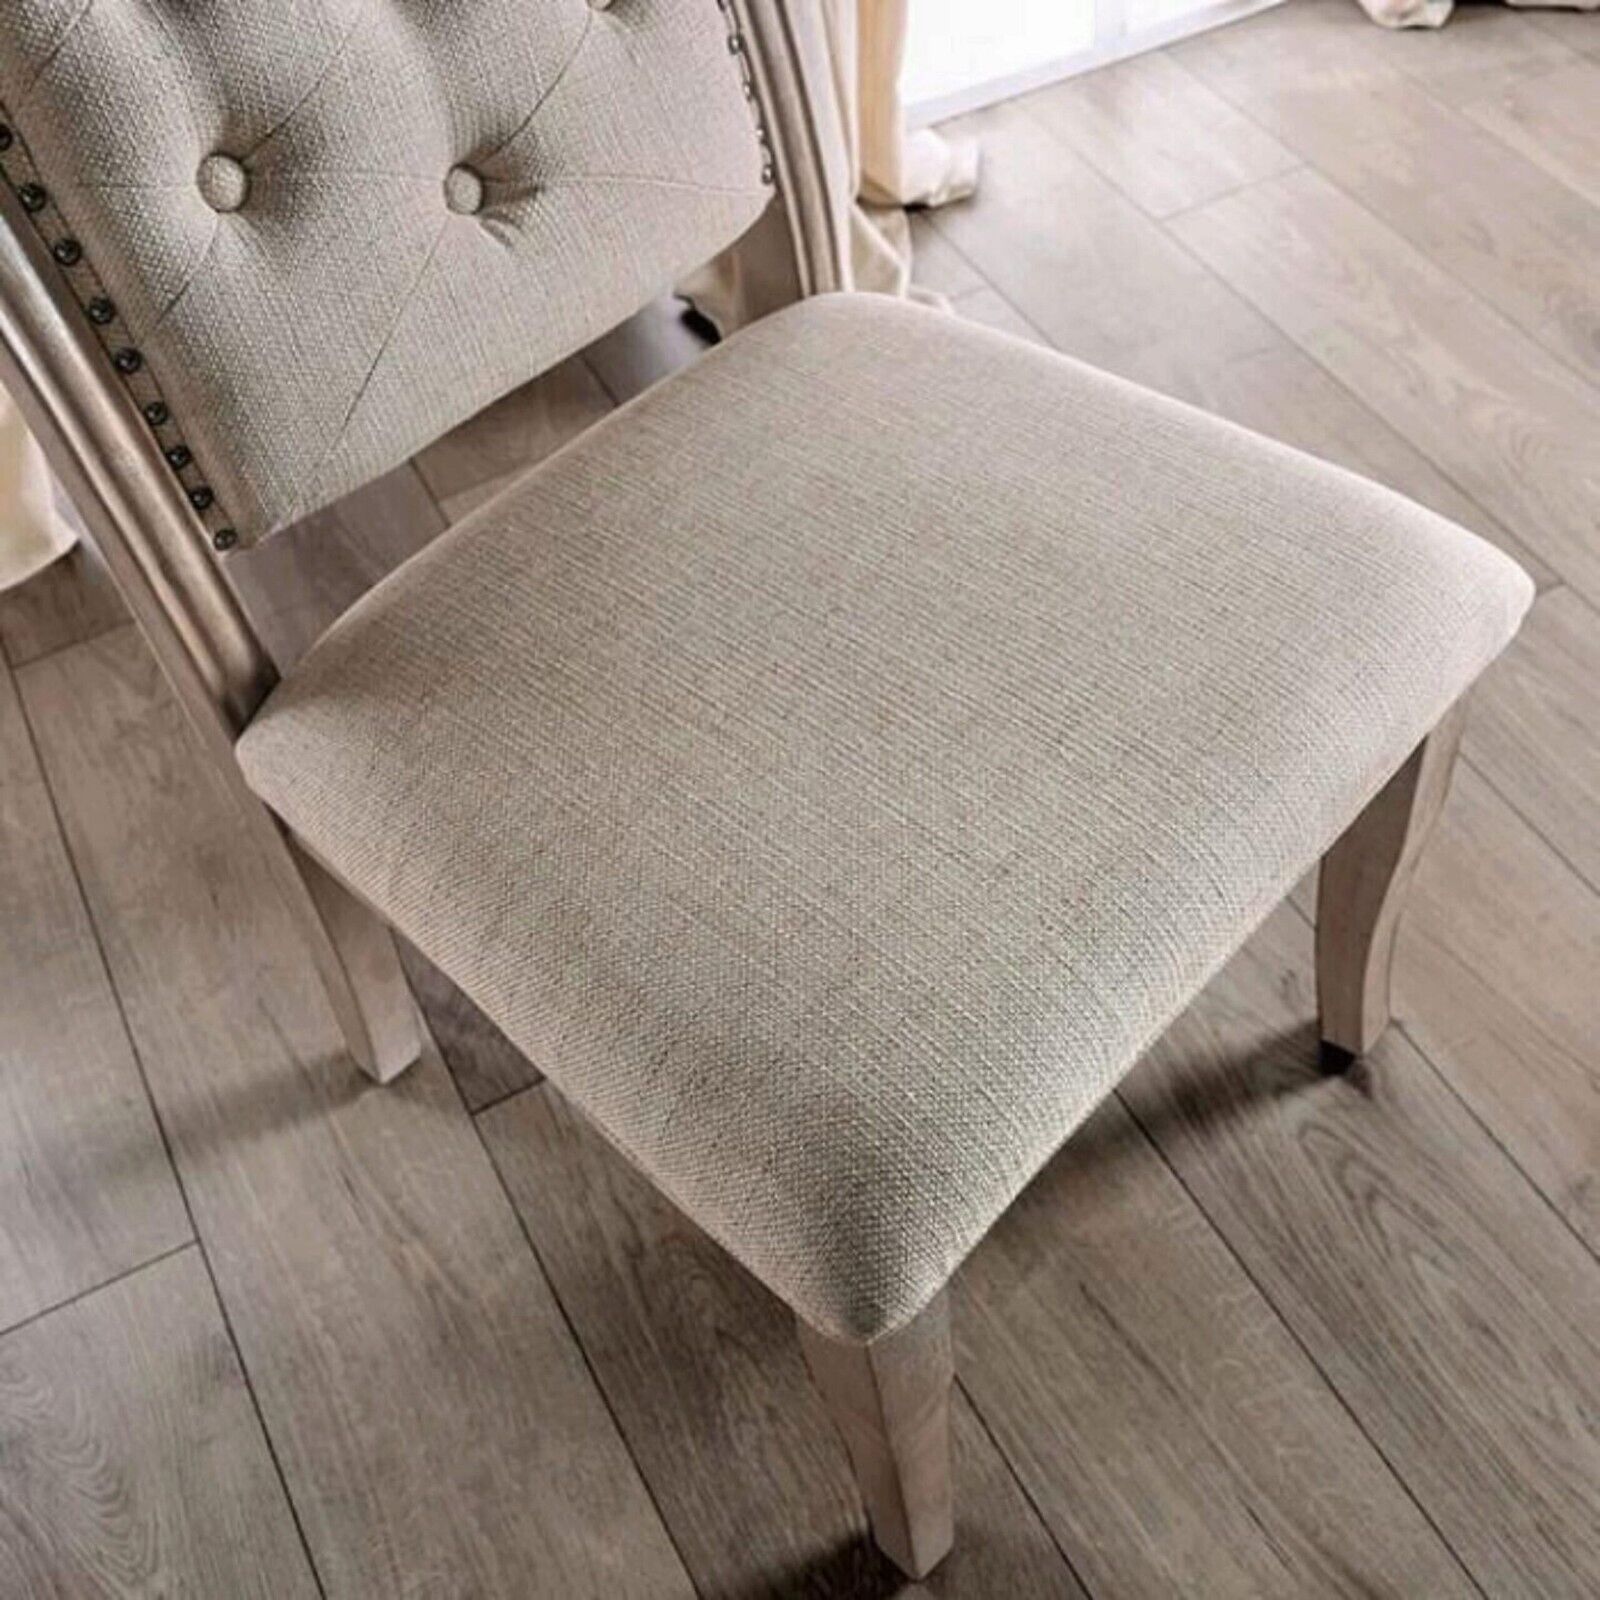 Esofastore Transitional Rustic Beautiful Set of 2 Side Chairs Button Tufted Nailhead Trim Chair Natural Tone Beige Fabric Dining Room